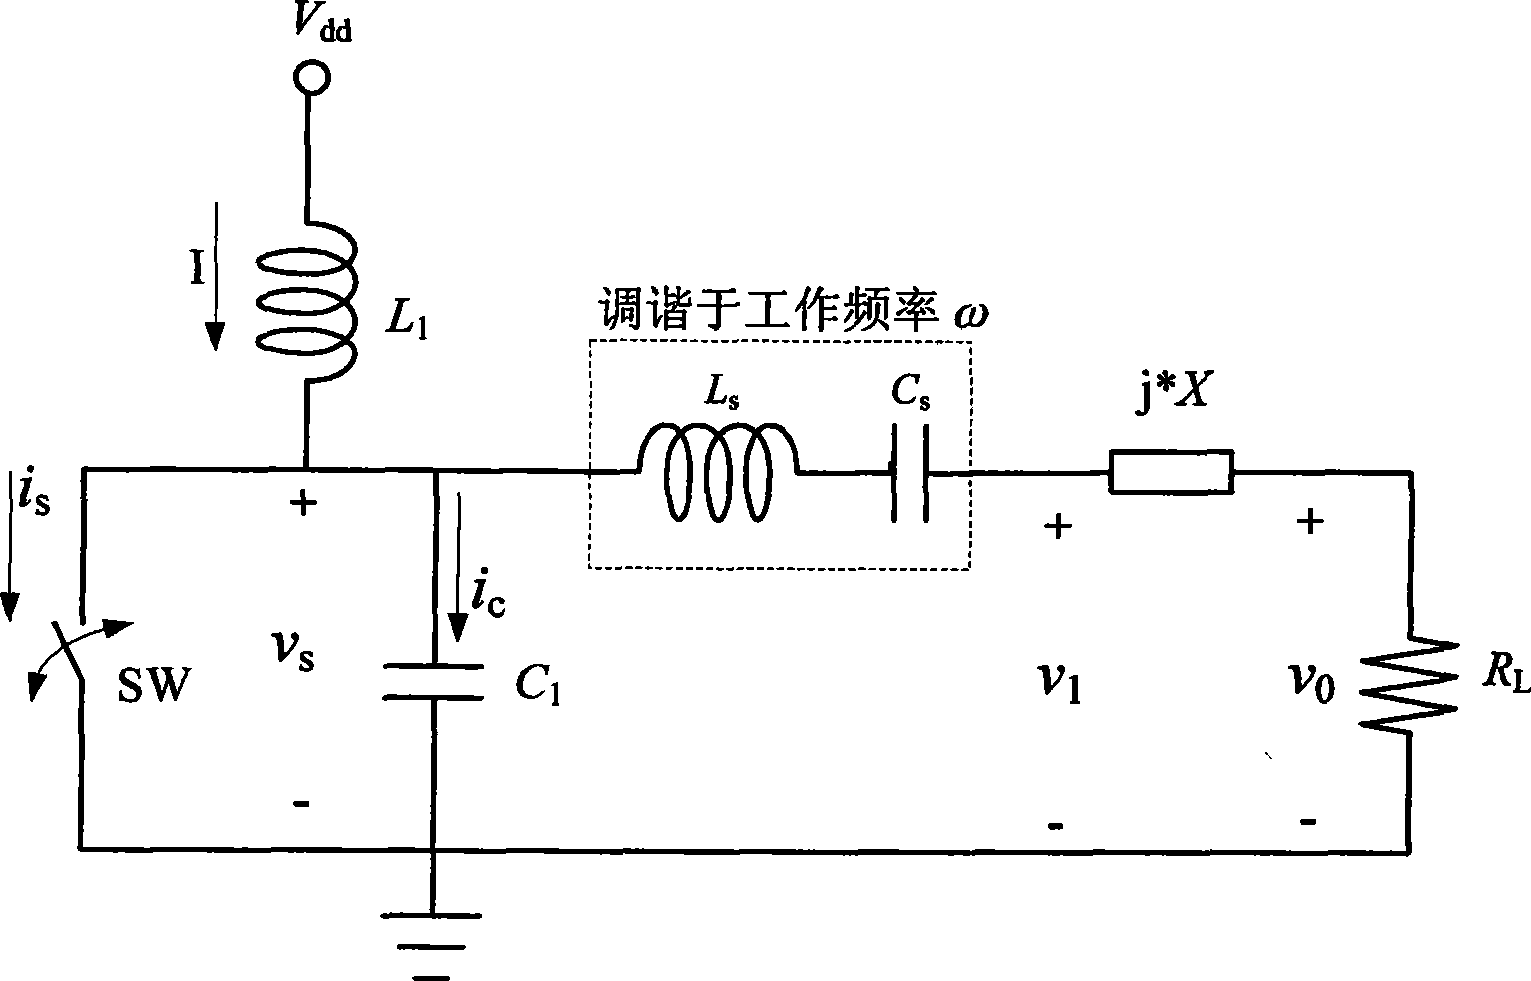 E type power amplifier digital power control circuit applied on low power output